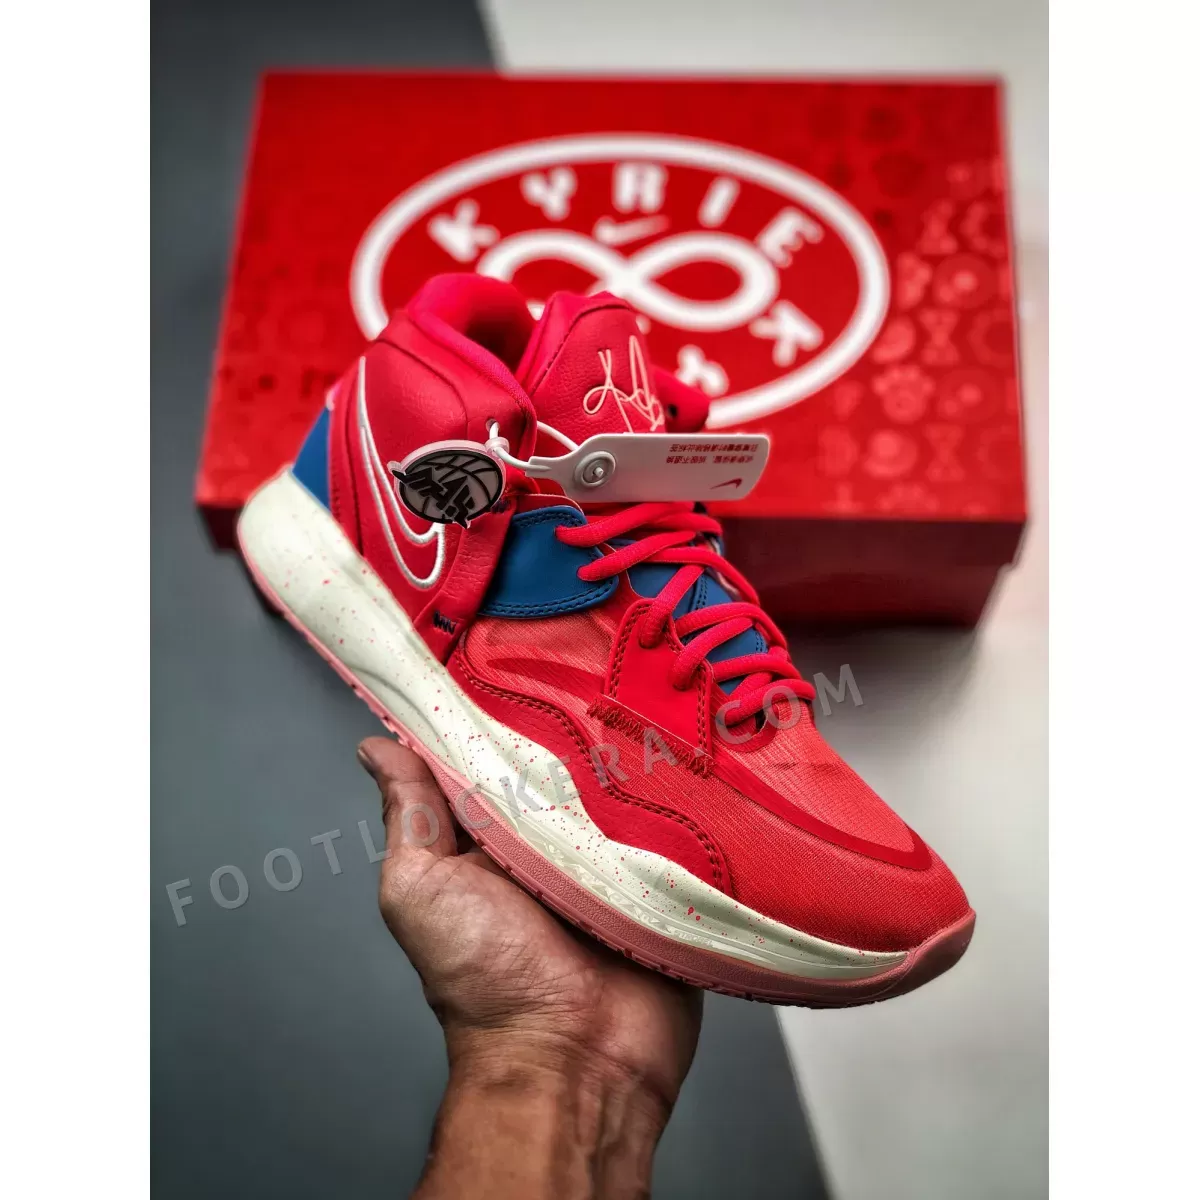 Nike Kyrie Infinity Siren Red/Dutch Blue/White Kyrie Infinity Red